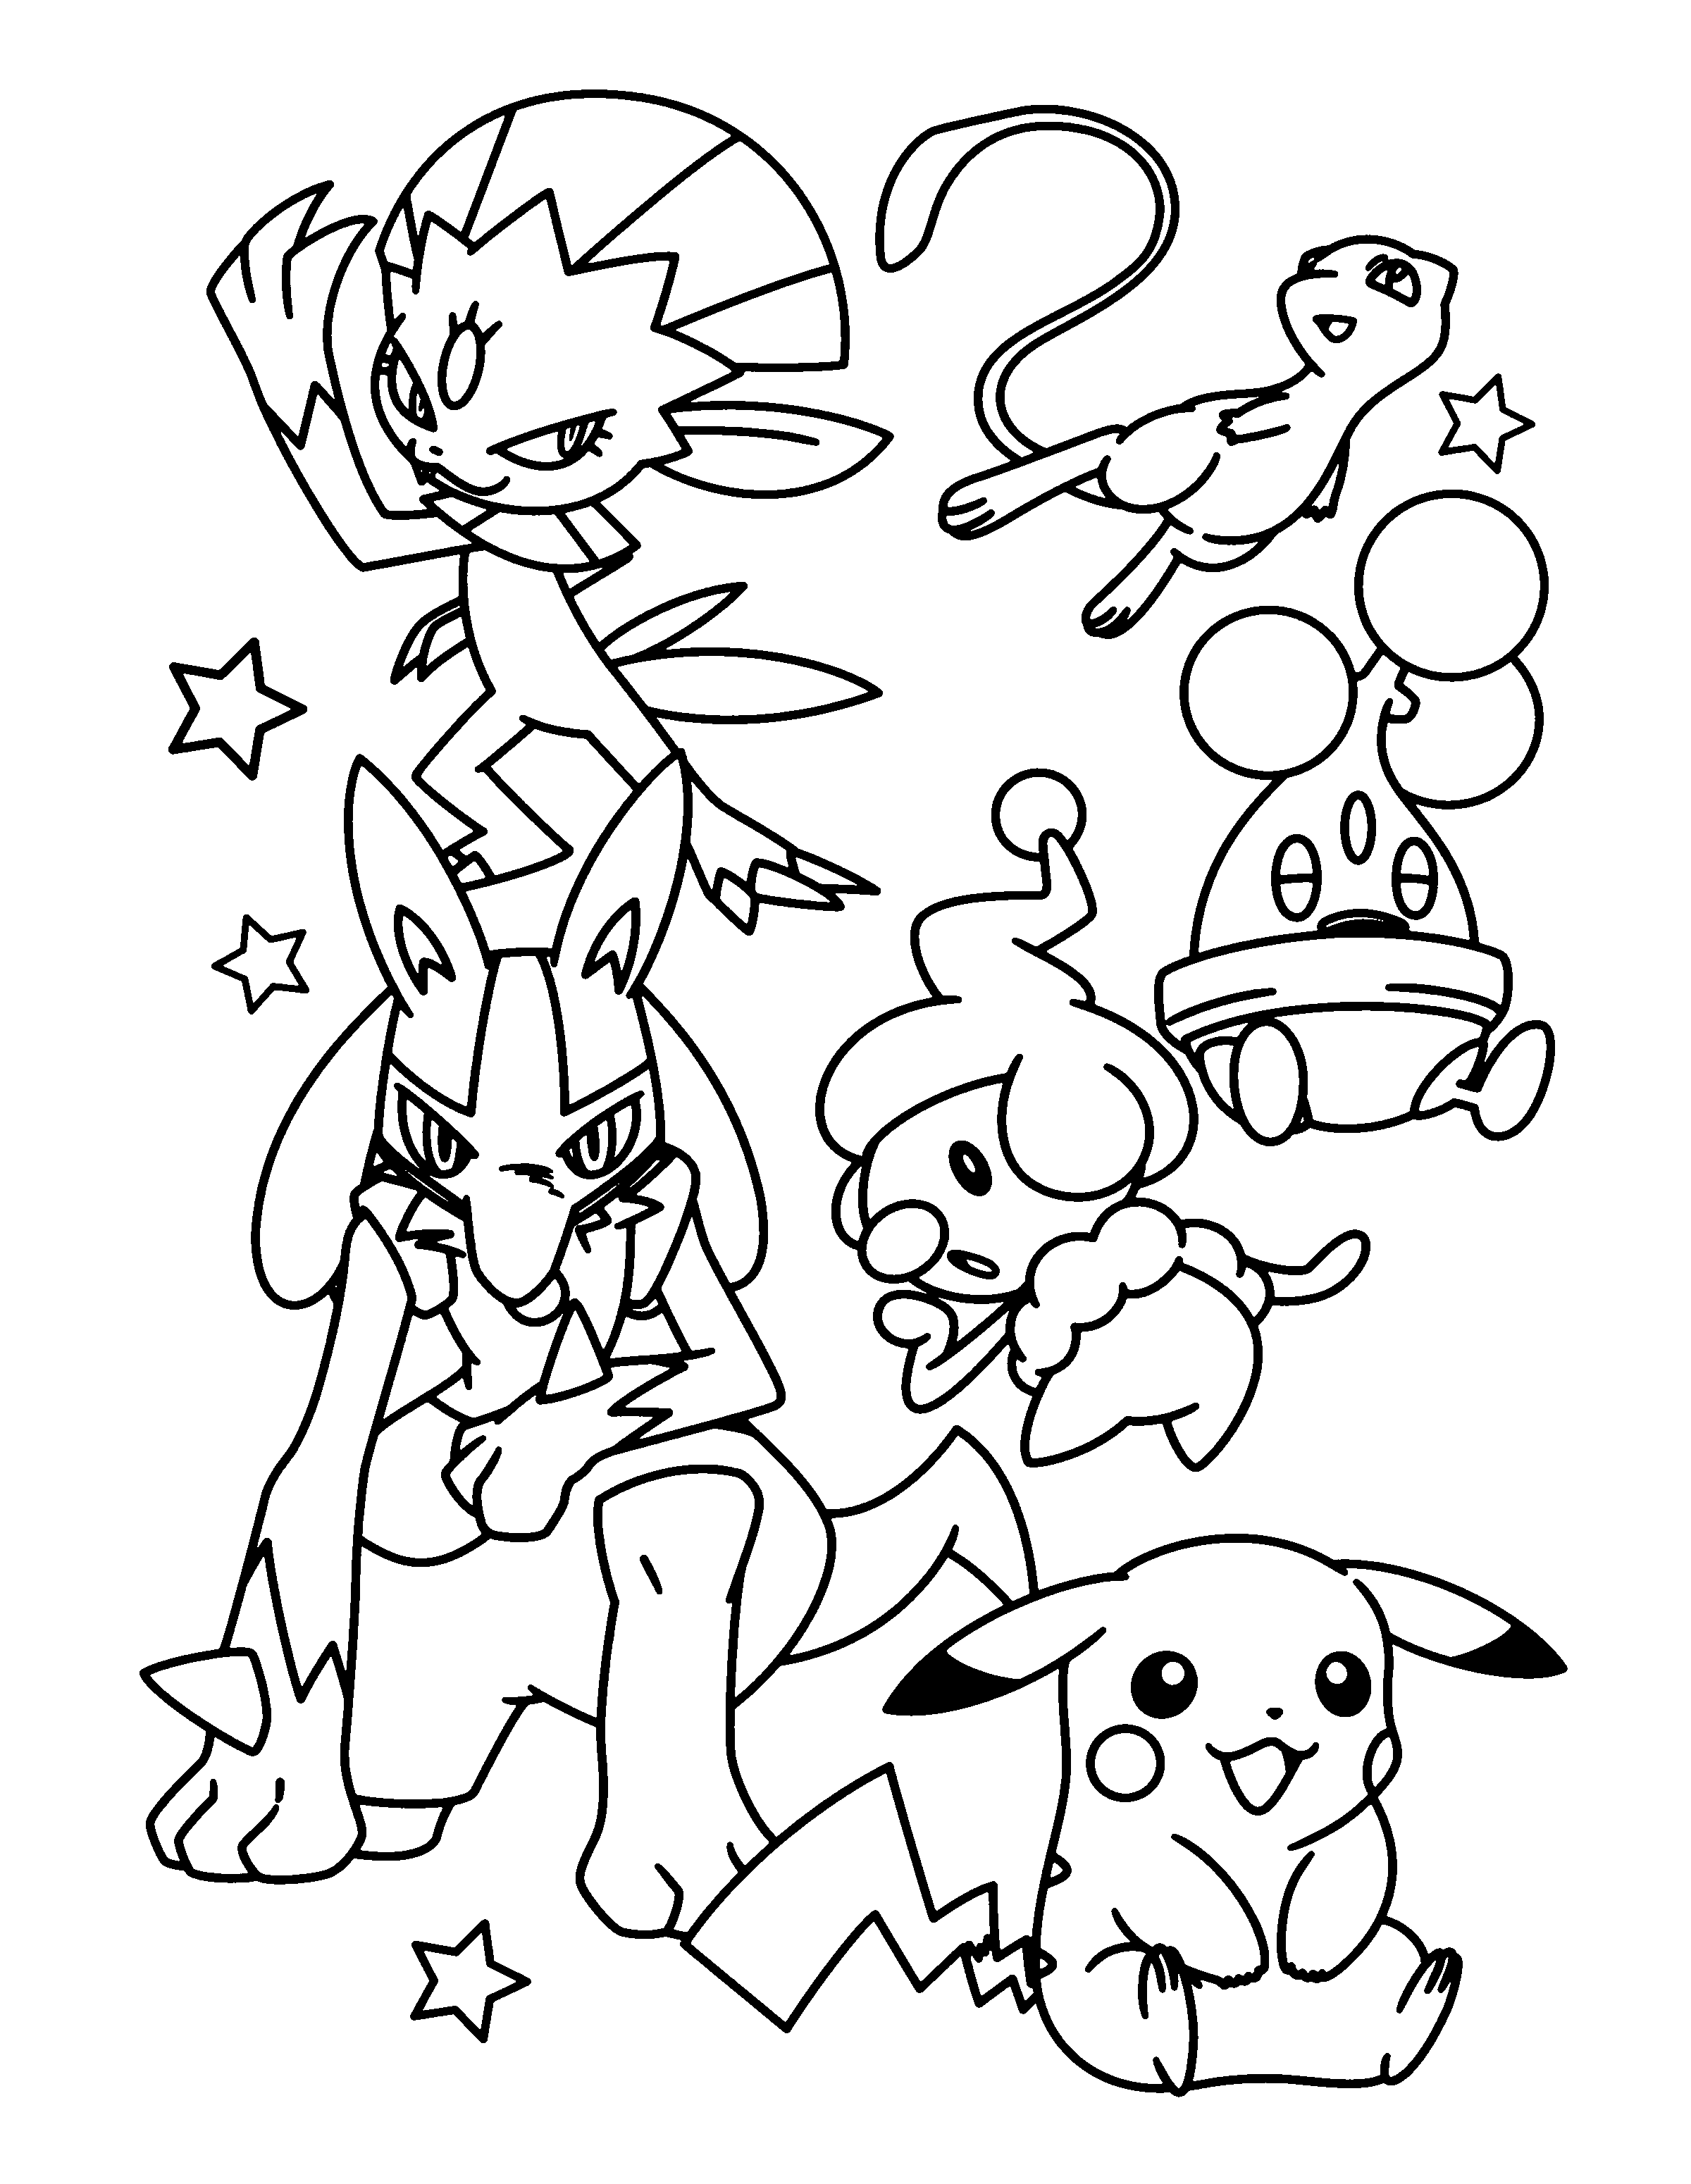 coloring pages for pokemon pokemon coloring pages download pokemon images and print pokemon for coloring pages 